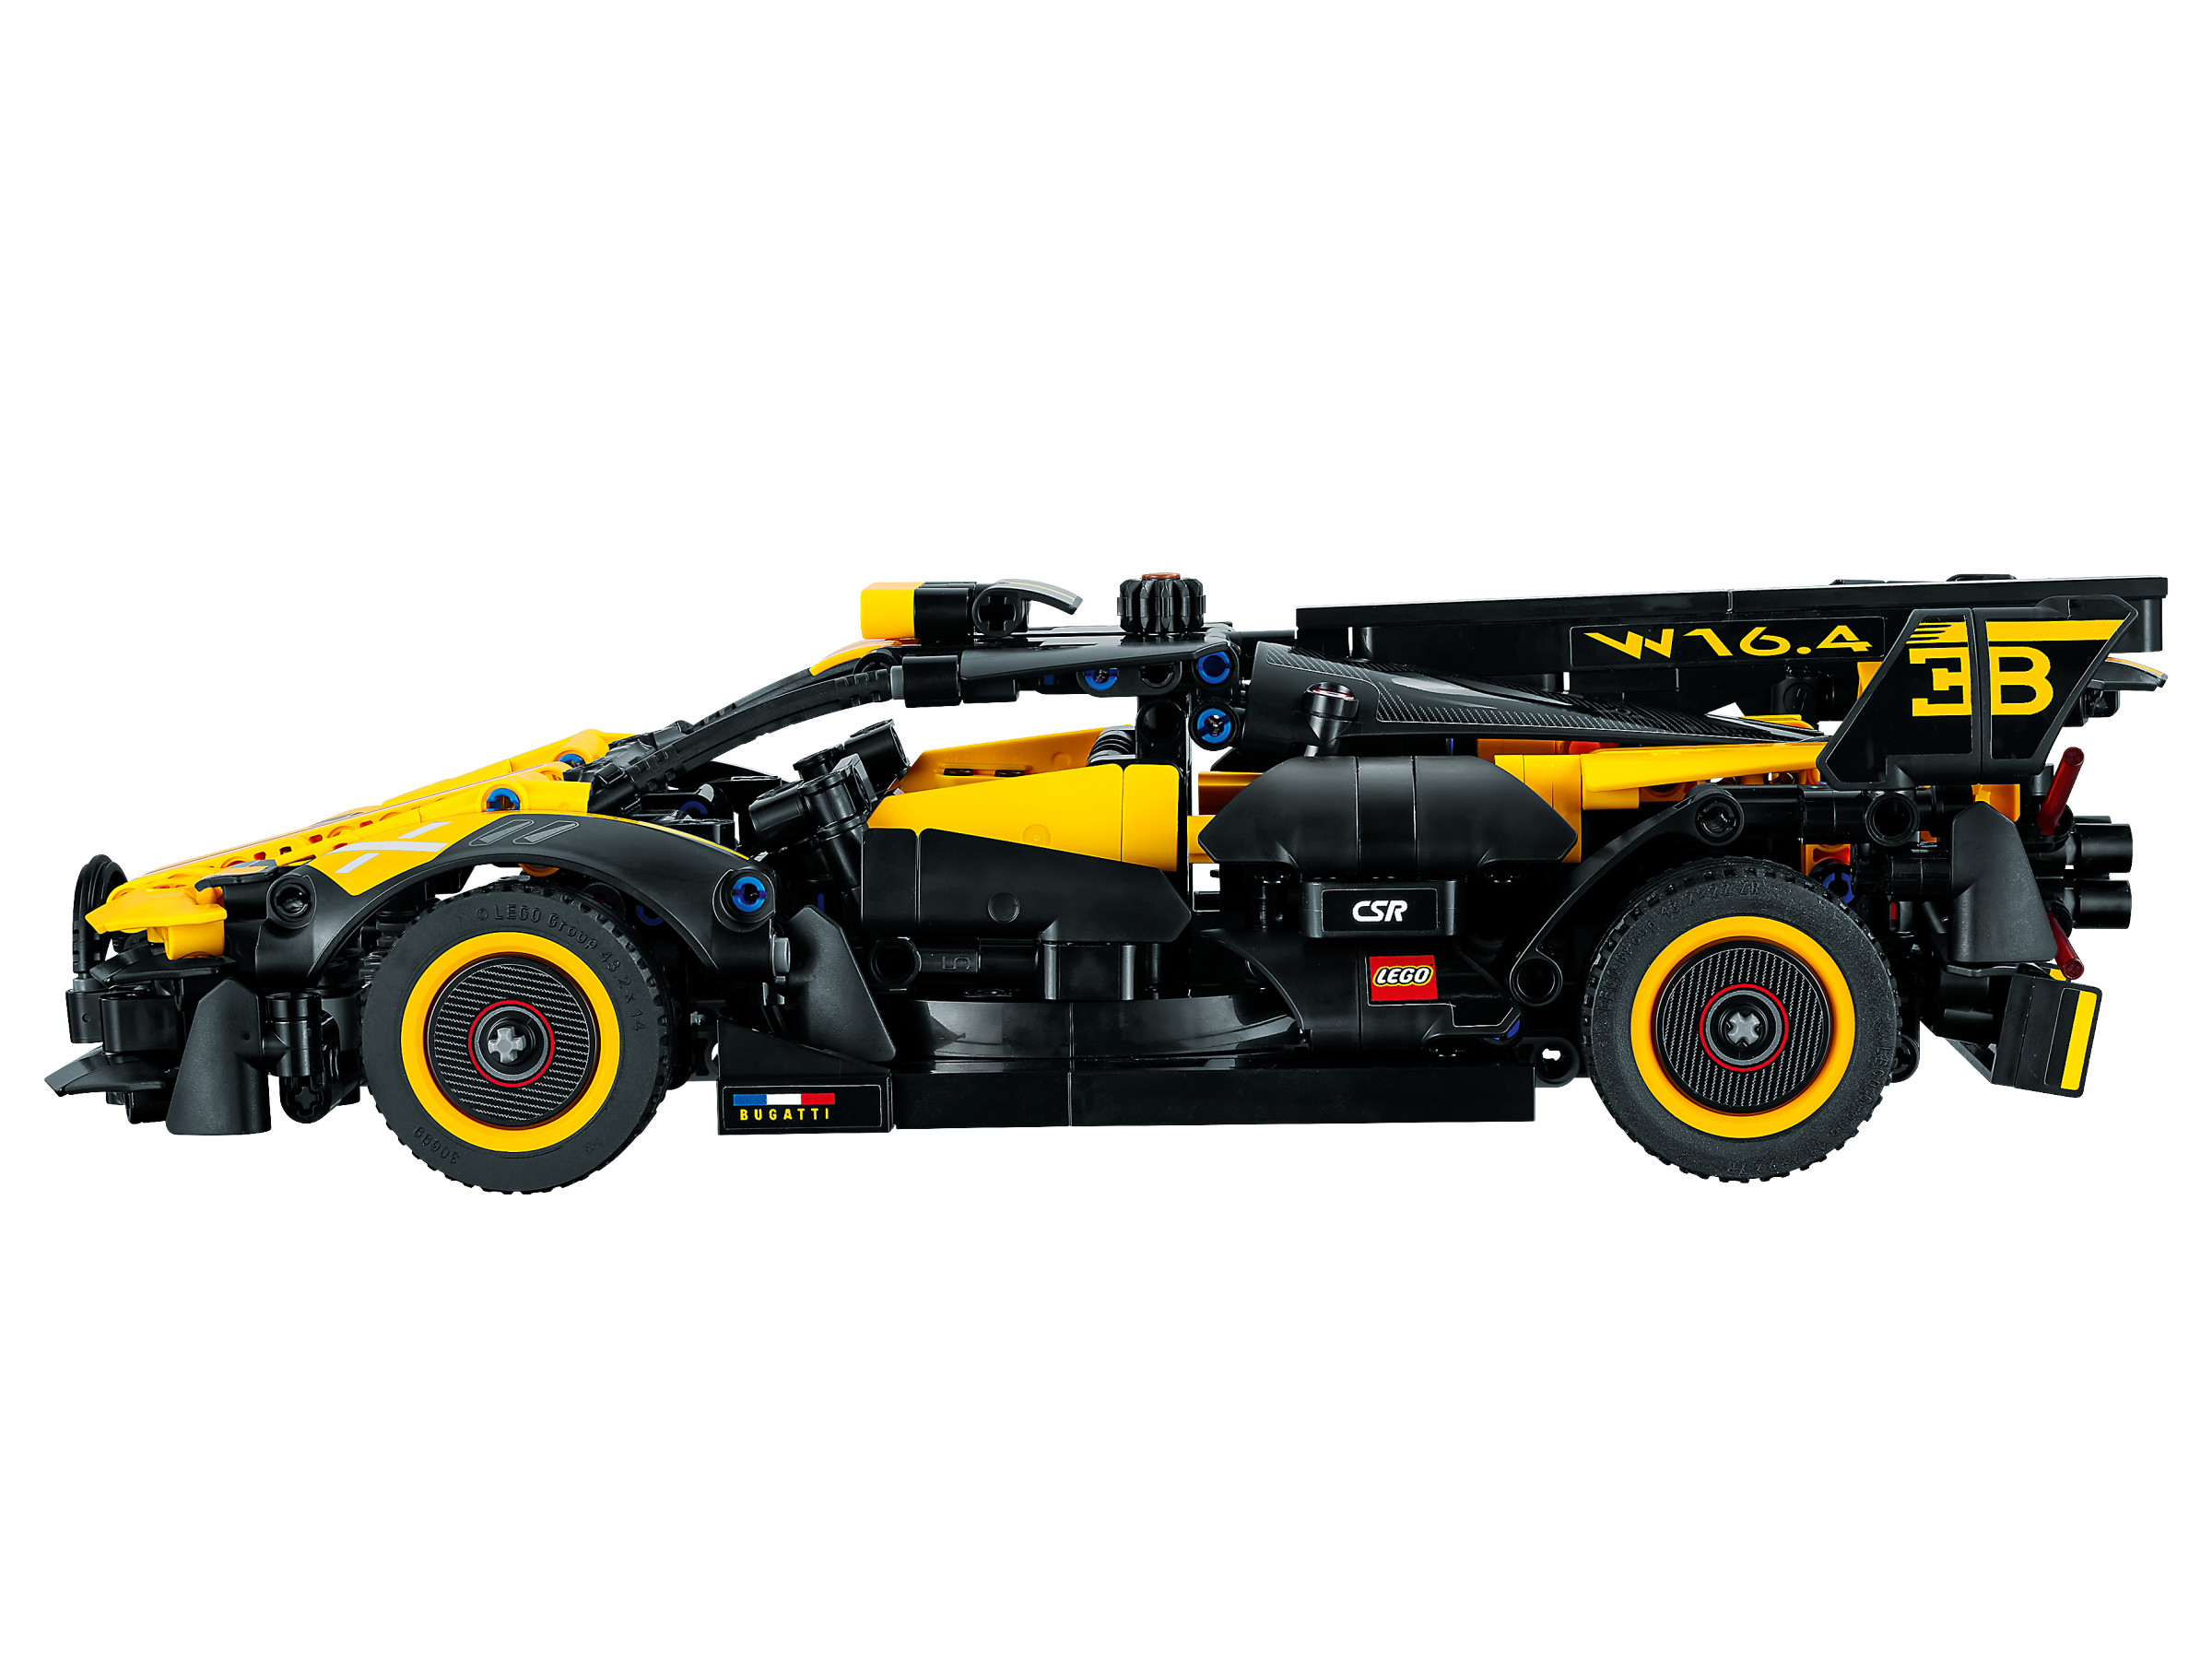 Bugatti Bolide 42151 | Technic™ | Buy online at the Official LEGO